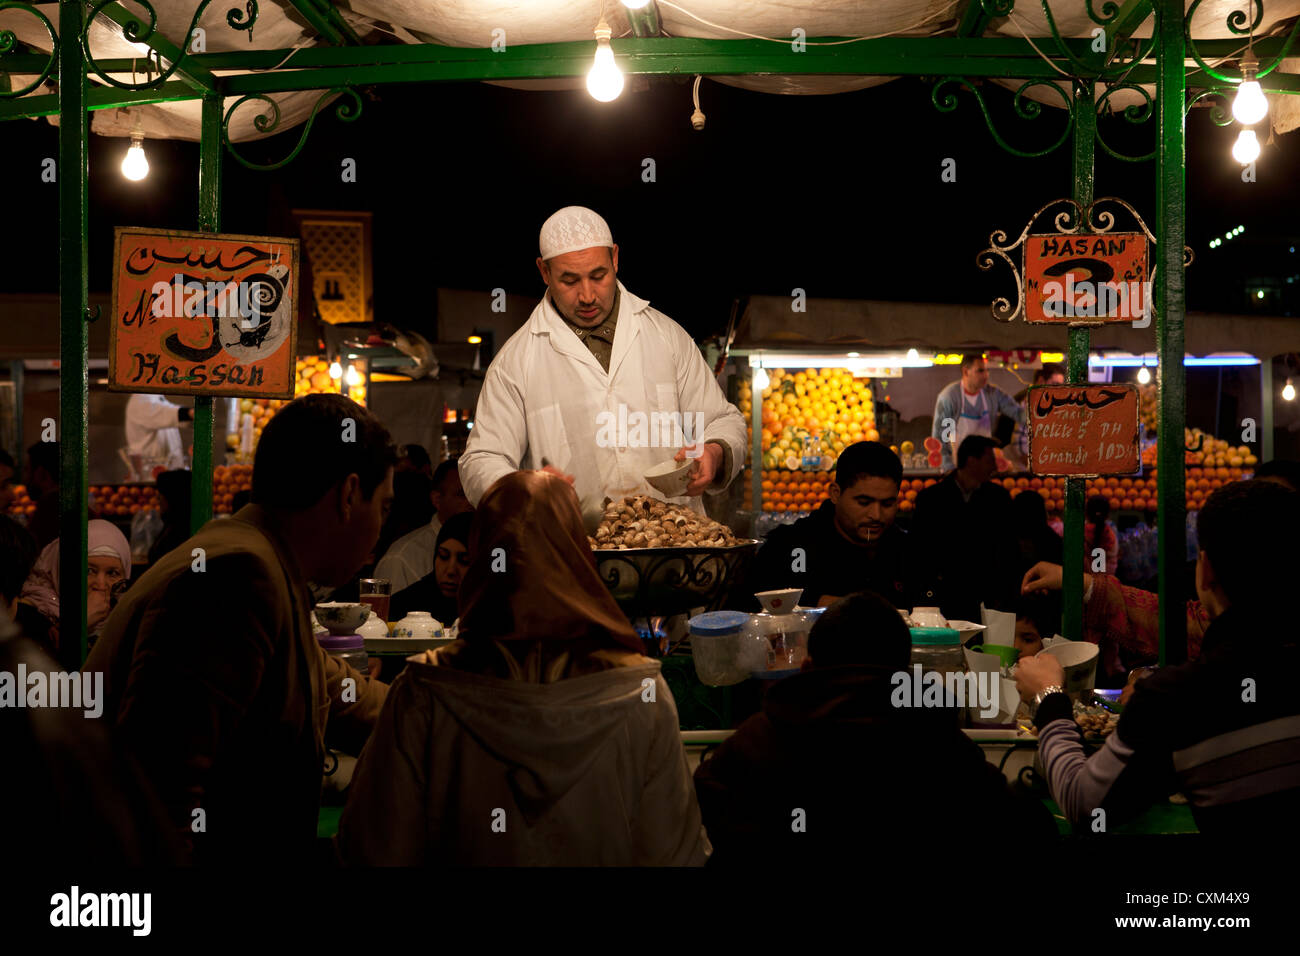 Food stall selling snails, Jamaa el Fna Square in Marrakech, Morocco Stock Photo